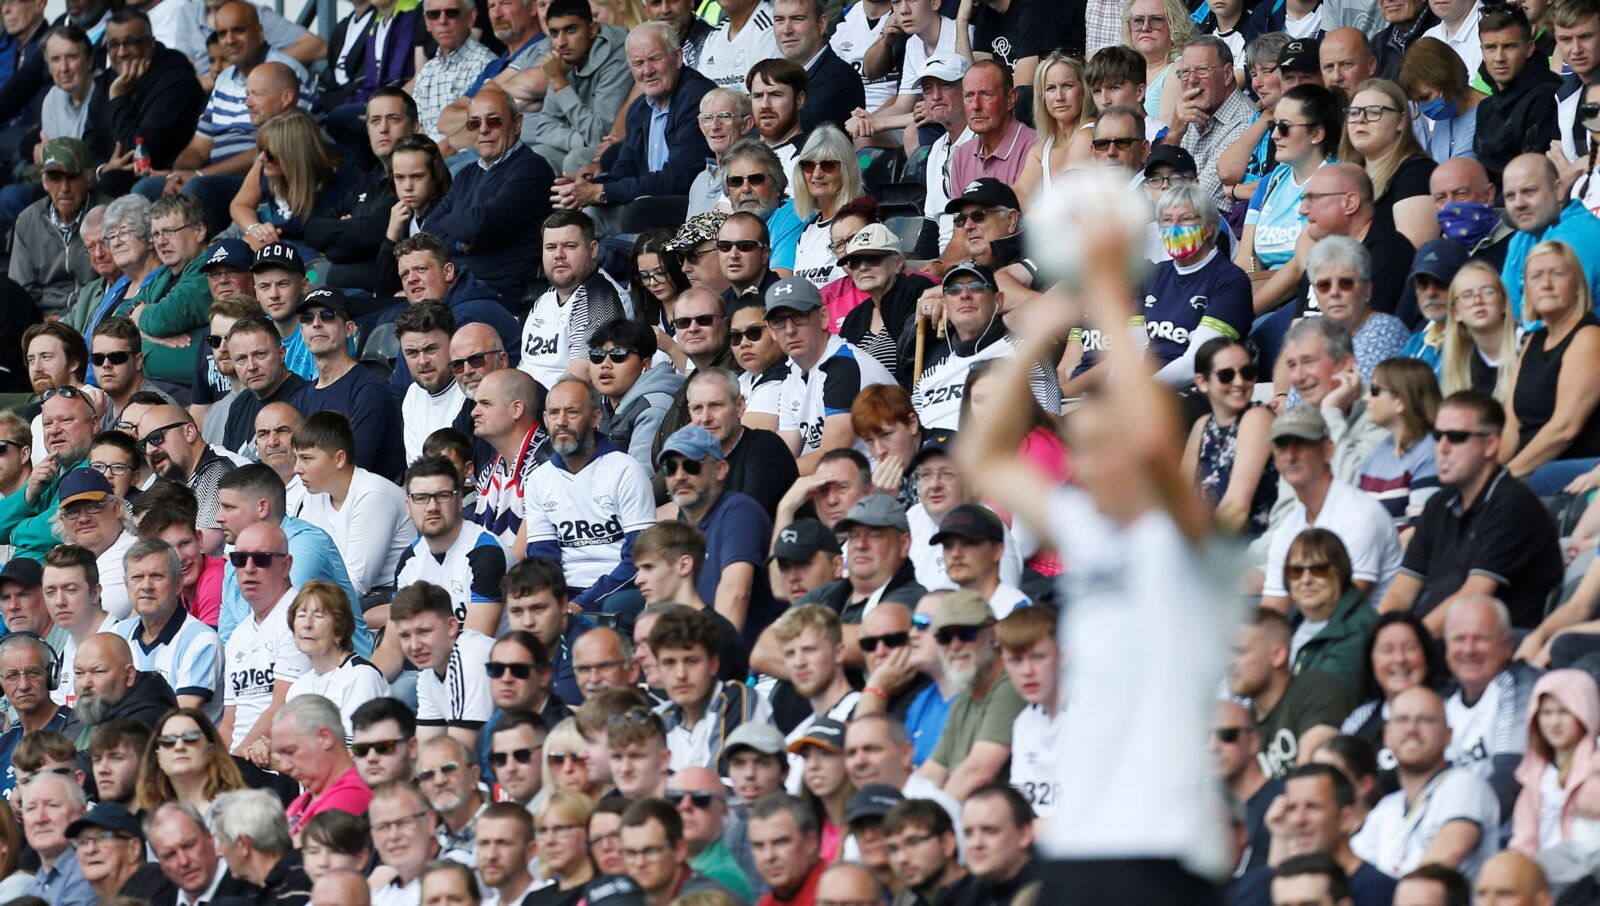 Soccer Football - Championship - Derby County v Nottingham Forest - Pride Park, Derby, Britain - August 28, 2021  General view of Derby County fans   Action Images/Craig Brough